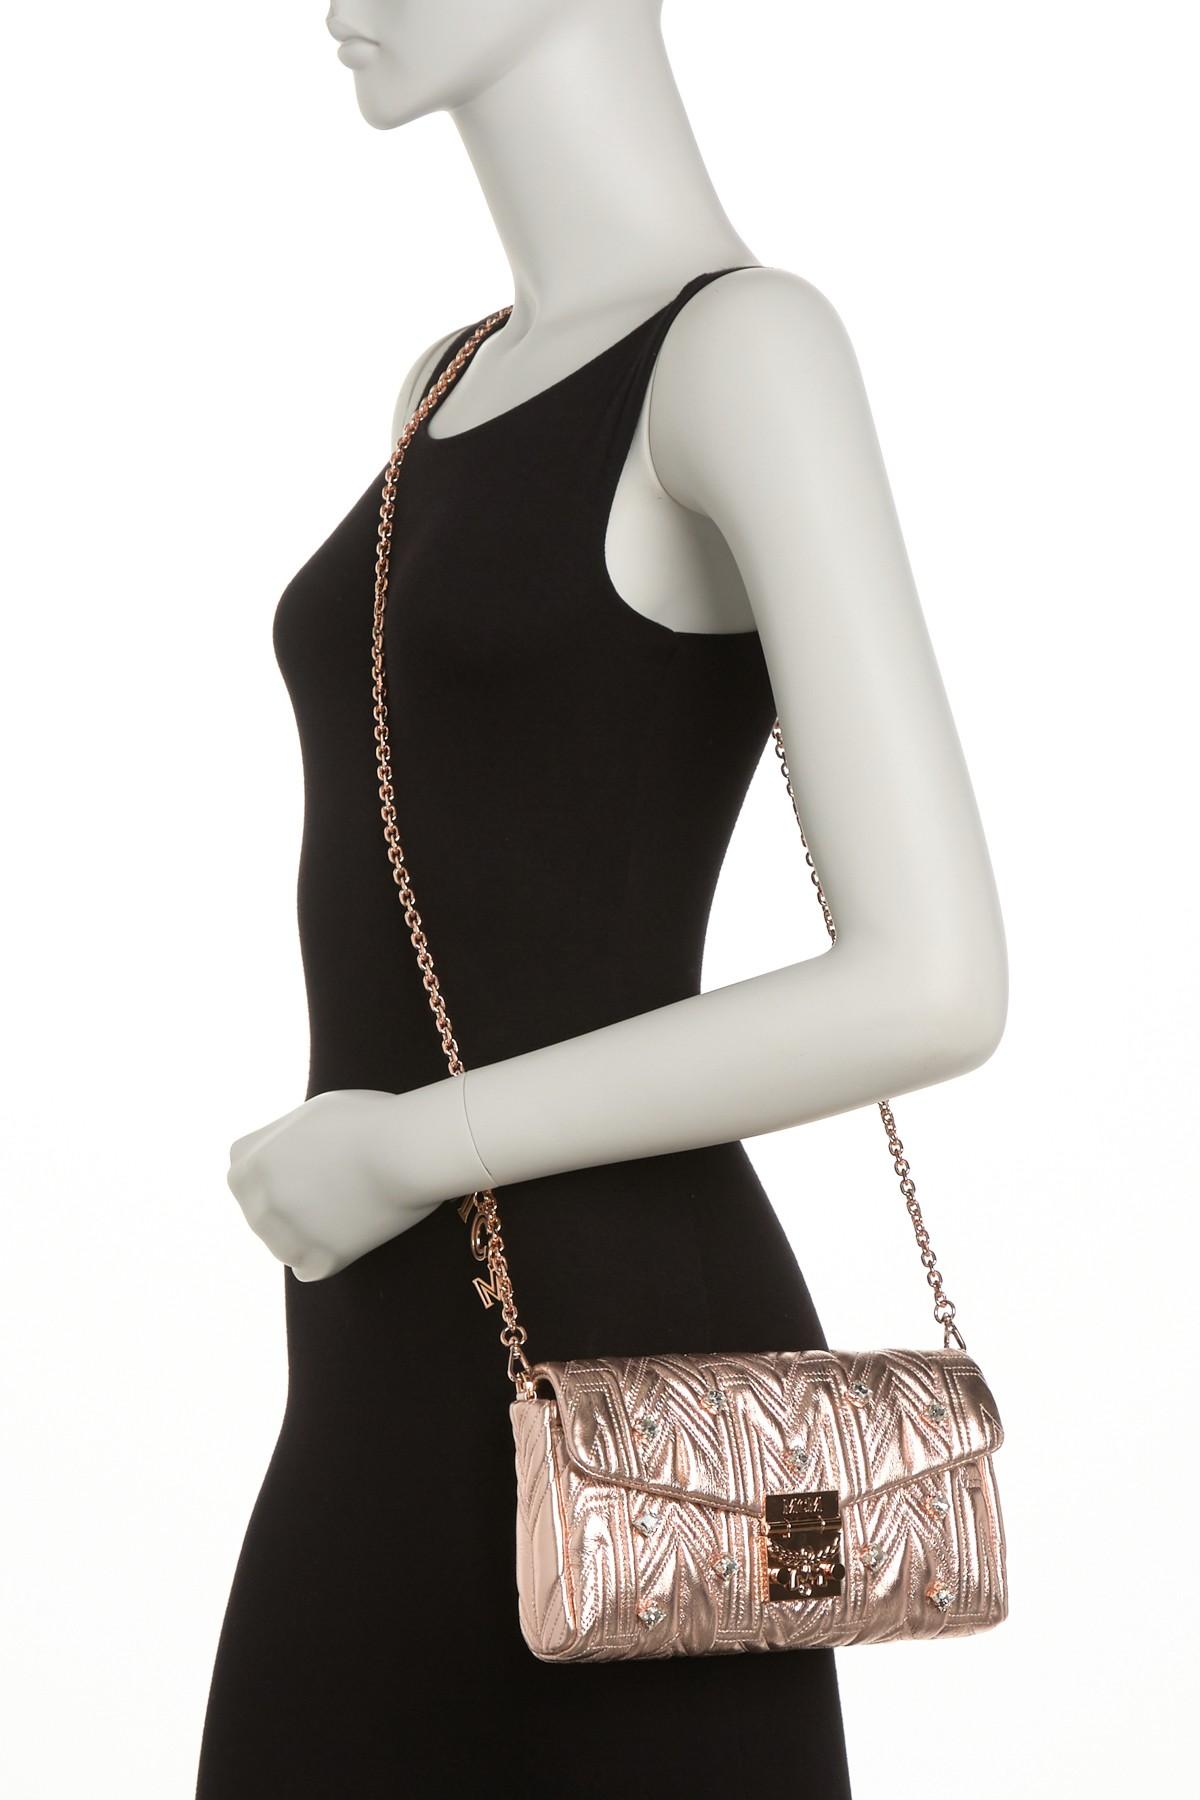 MCM Leather Millie Quilted Chain Strap Shoulder Bag in Pink - Lyst